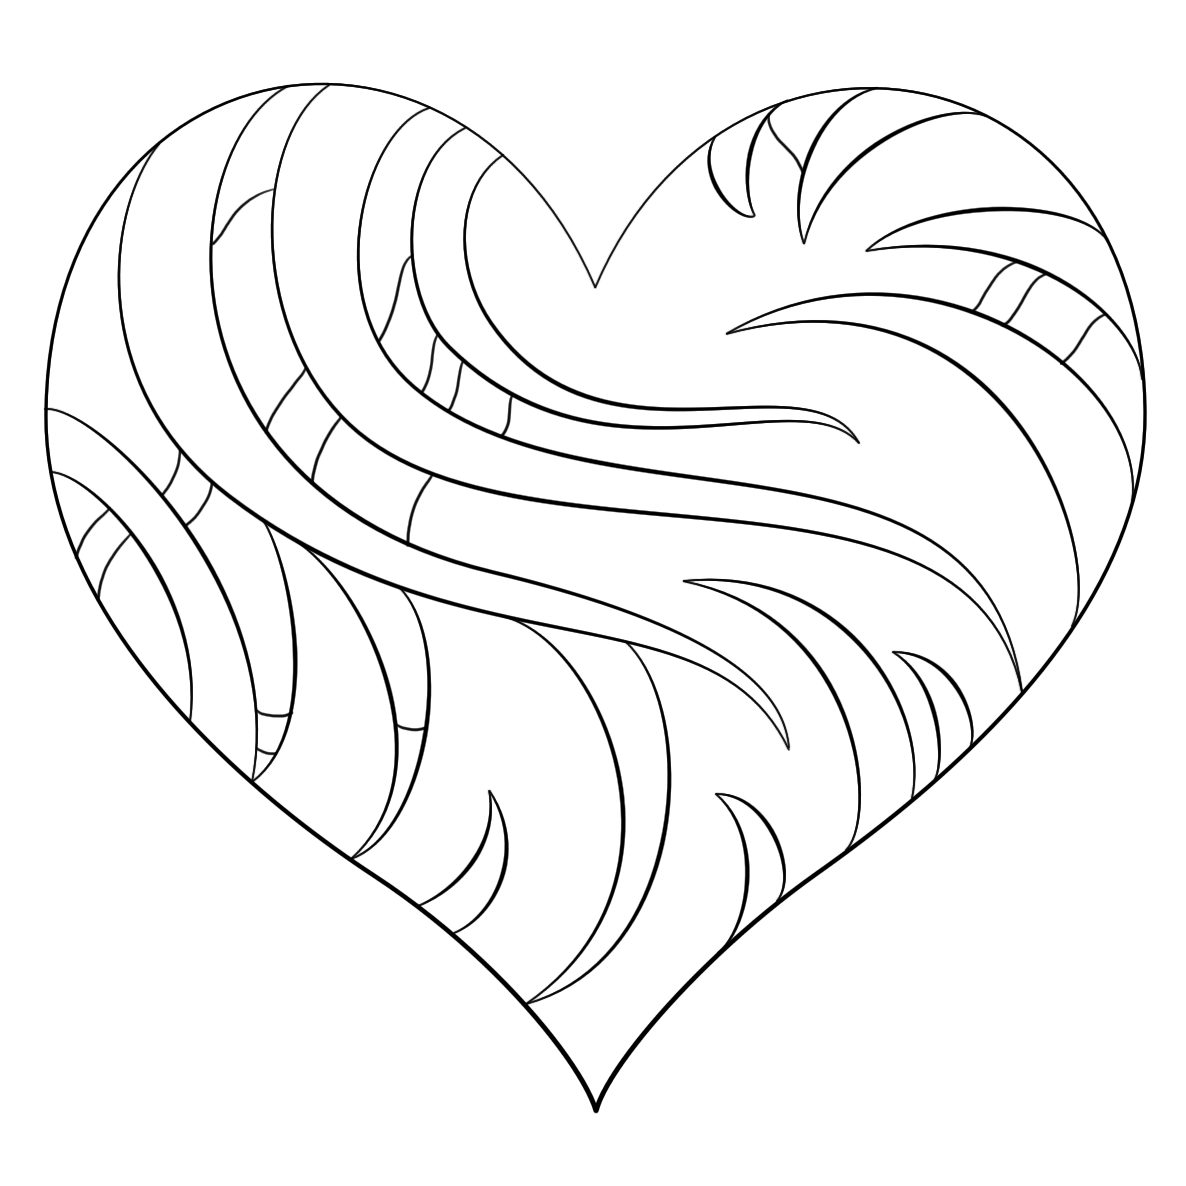 Intricate Heart Coloring Page